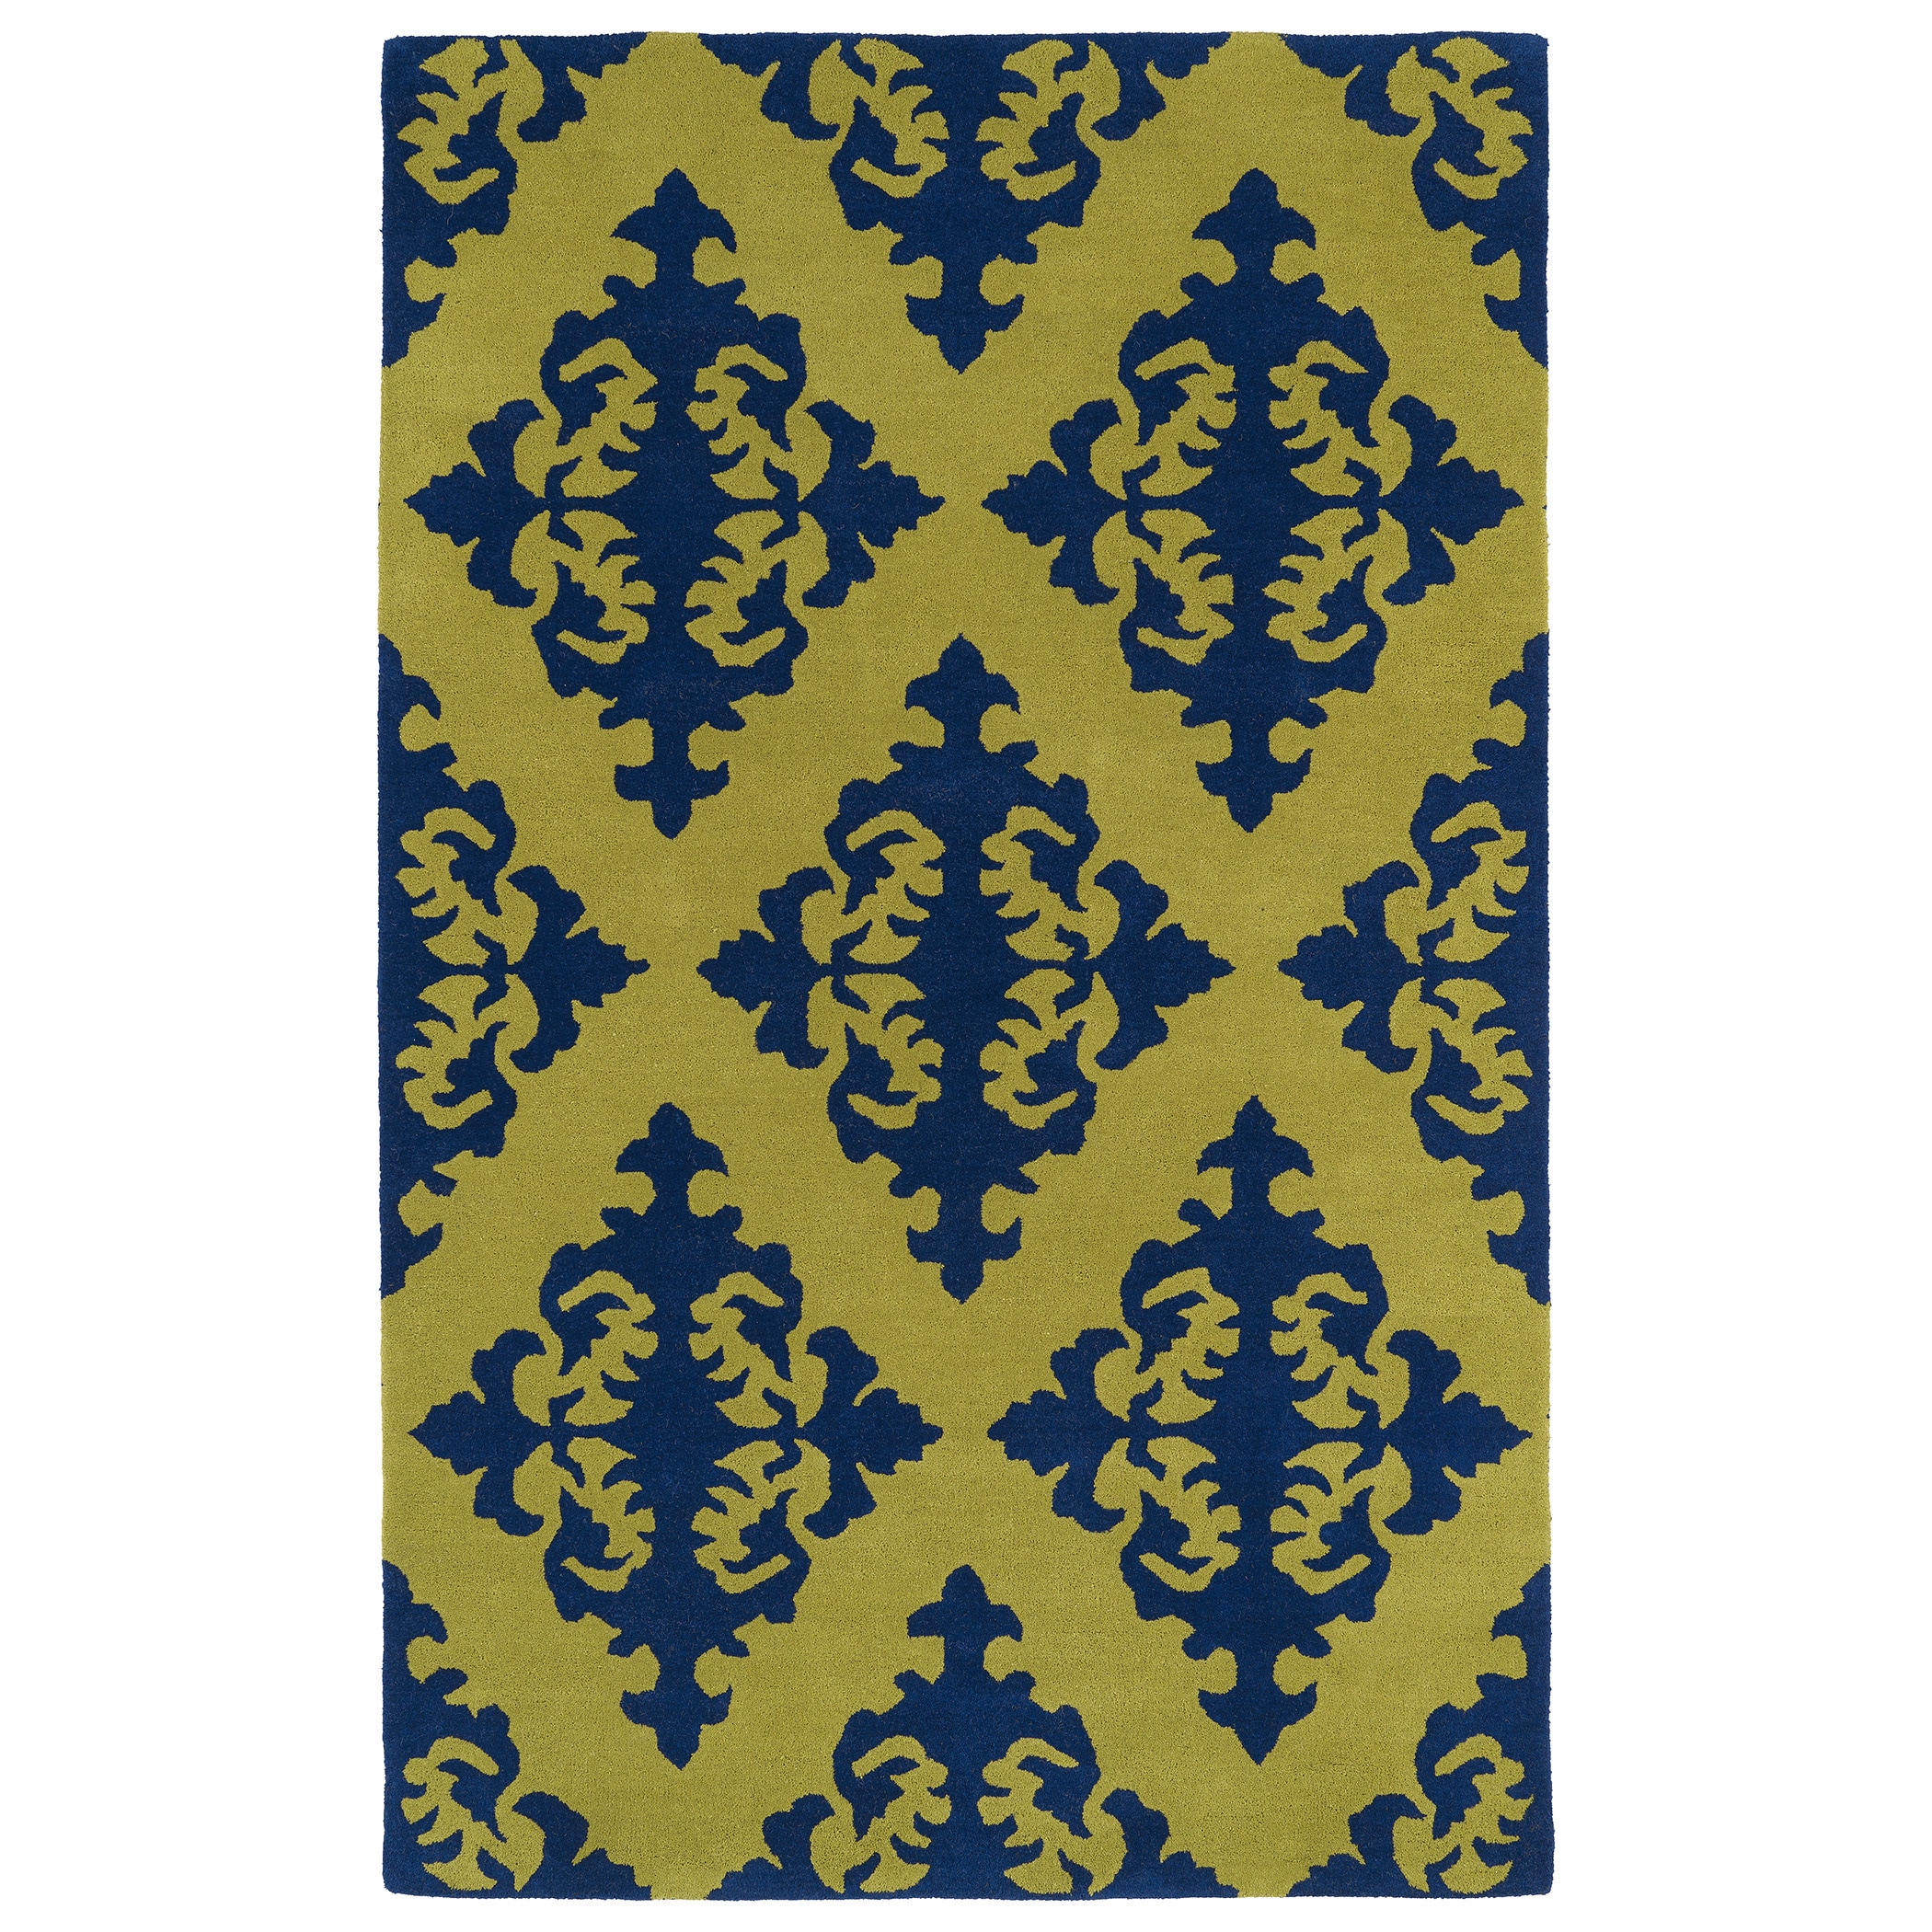 Kaleen Rugs Hand tufted Runway Navy/ Gold Damask Wool Rug (96 X 13) Gold Size 96 x 13